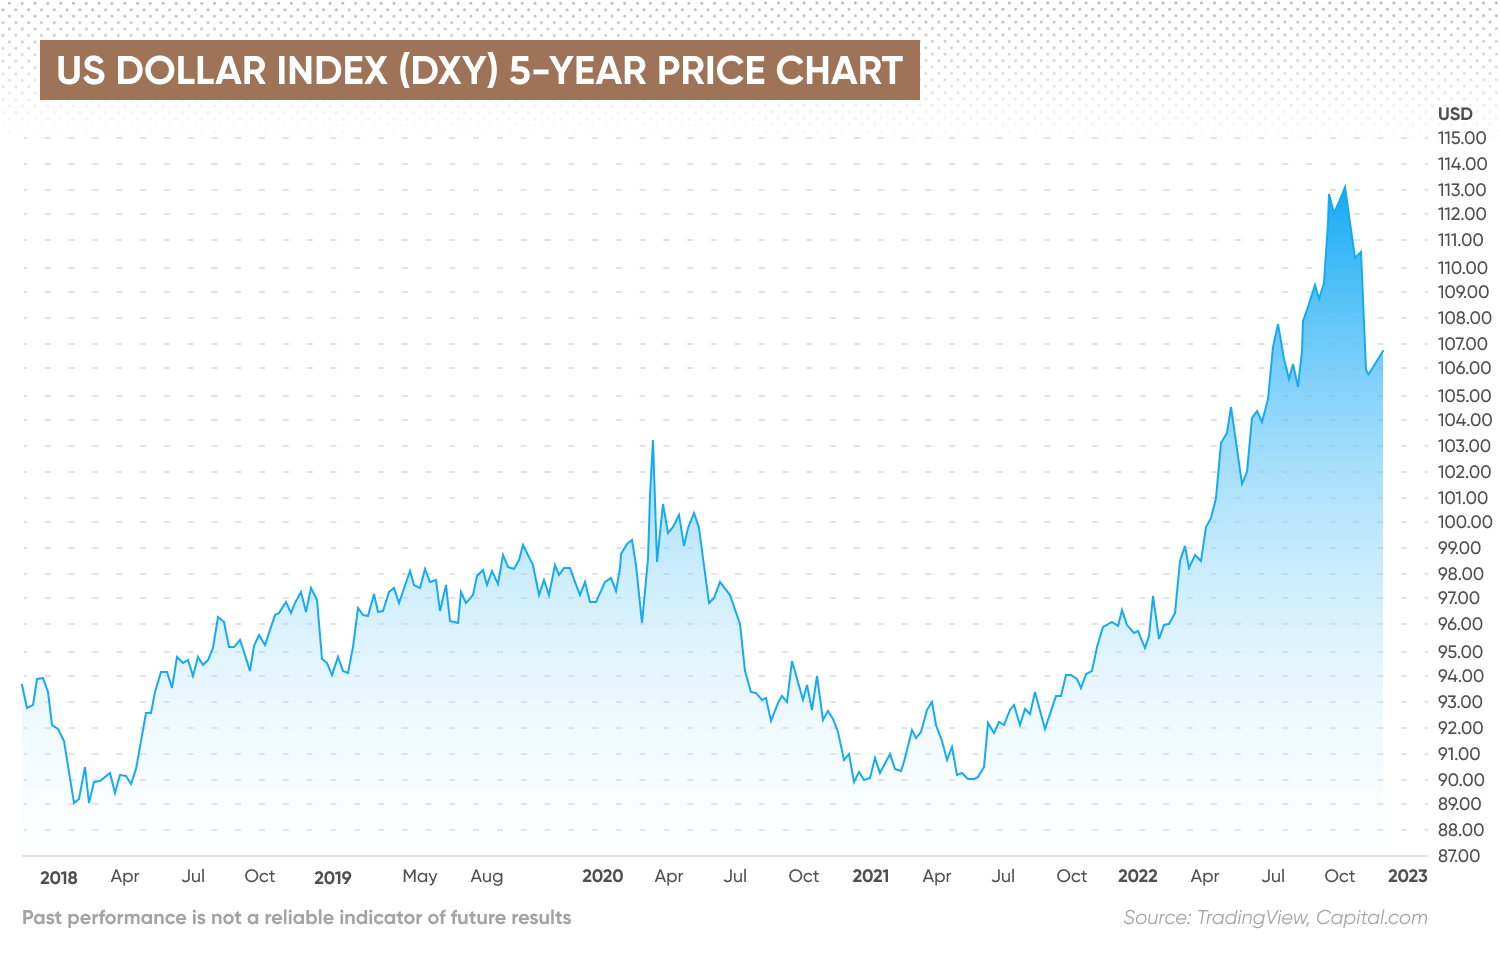 Five-year price chart for DXY